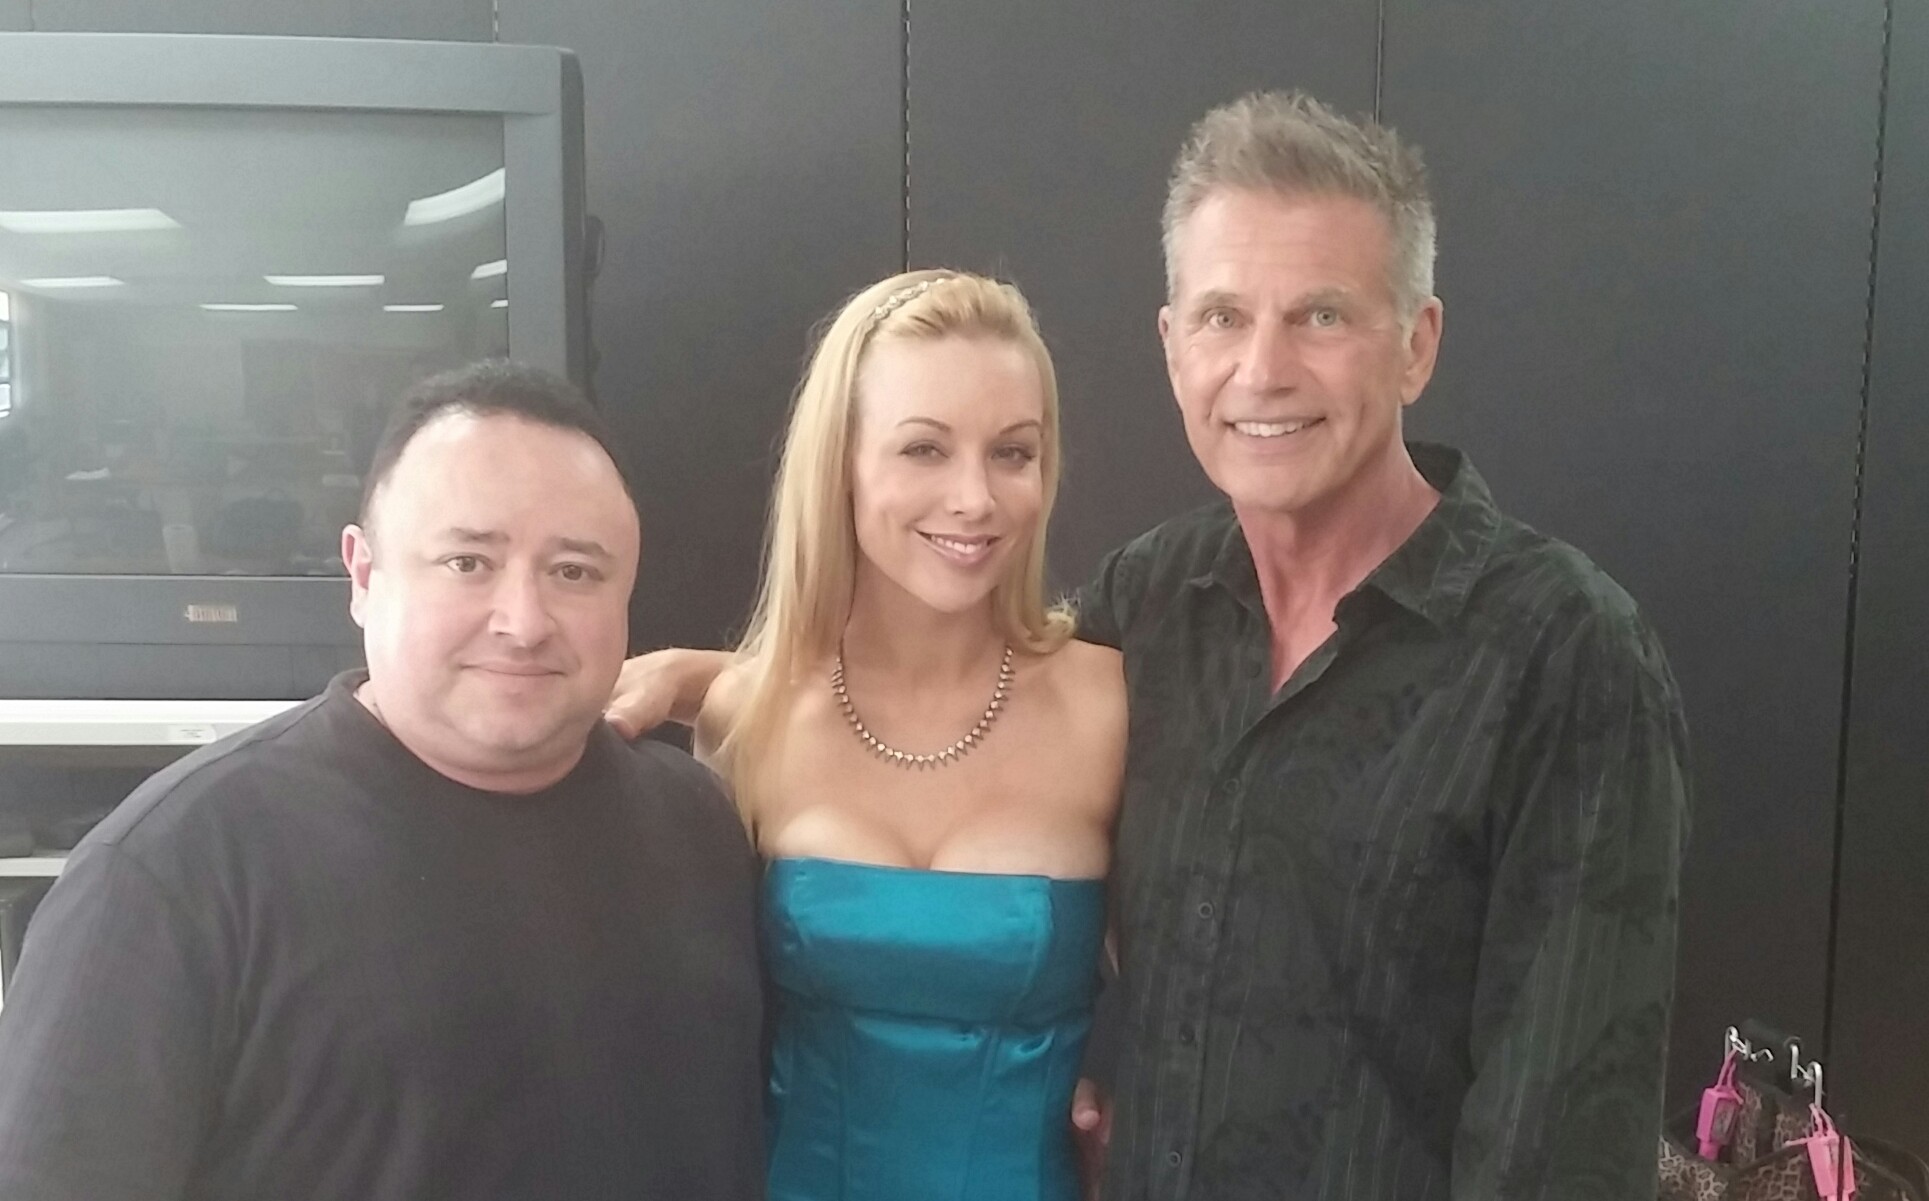 Gabriel Campisi, Kayden Kross and Steve Hanks on the set of School's Out.